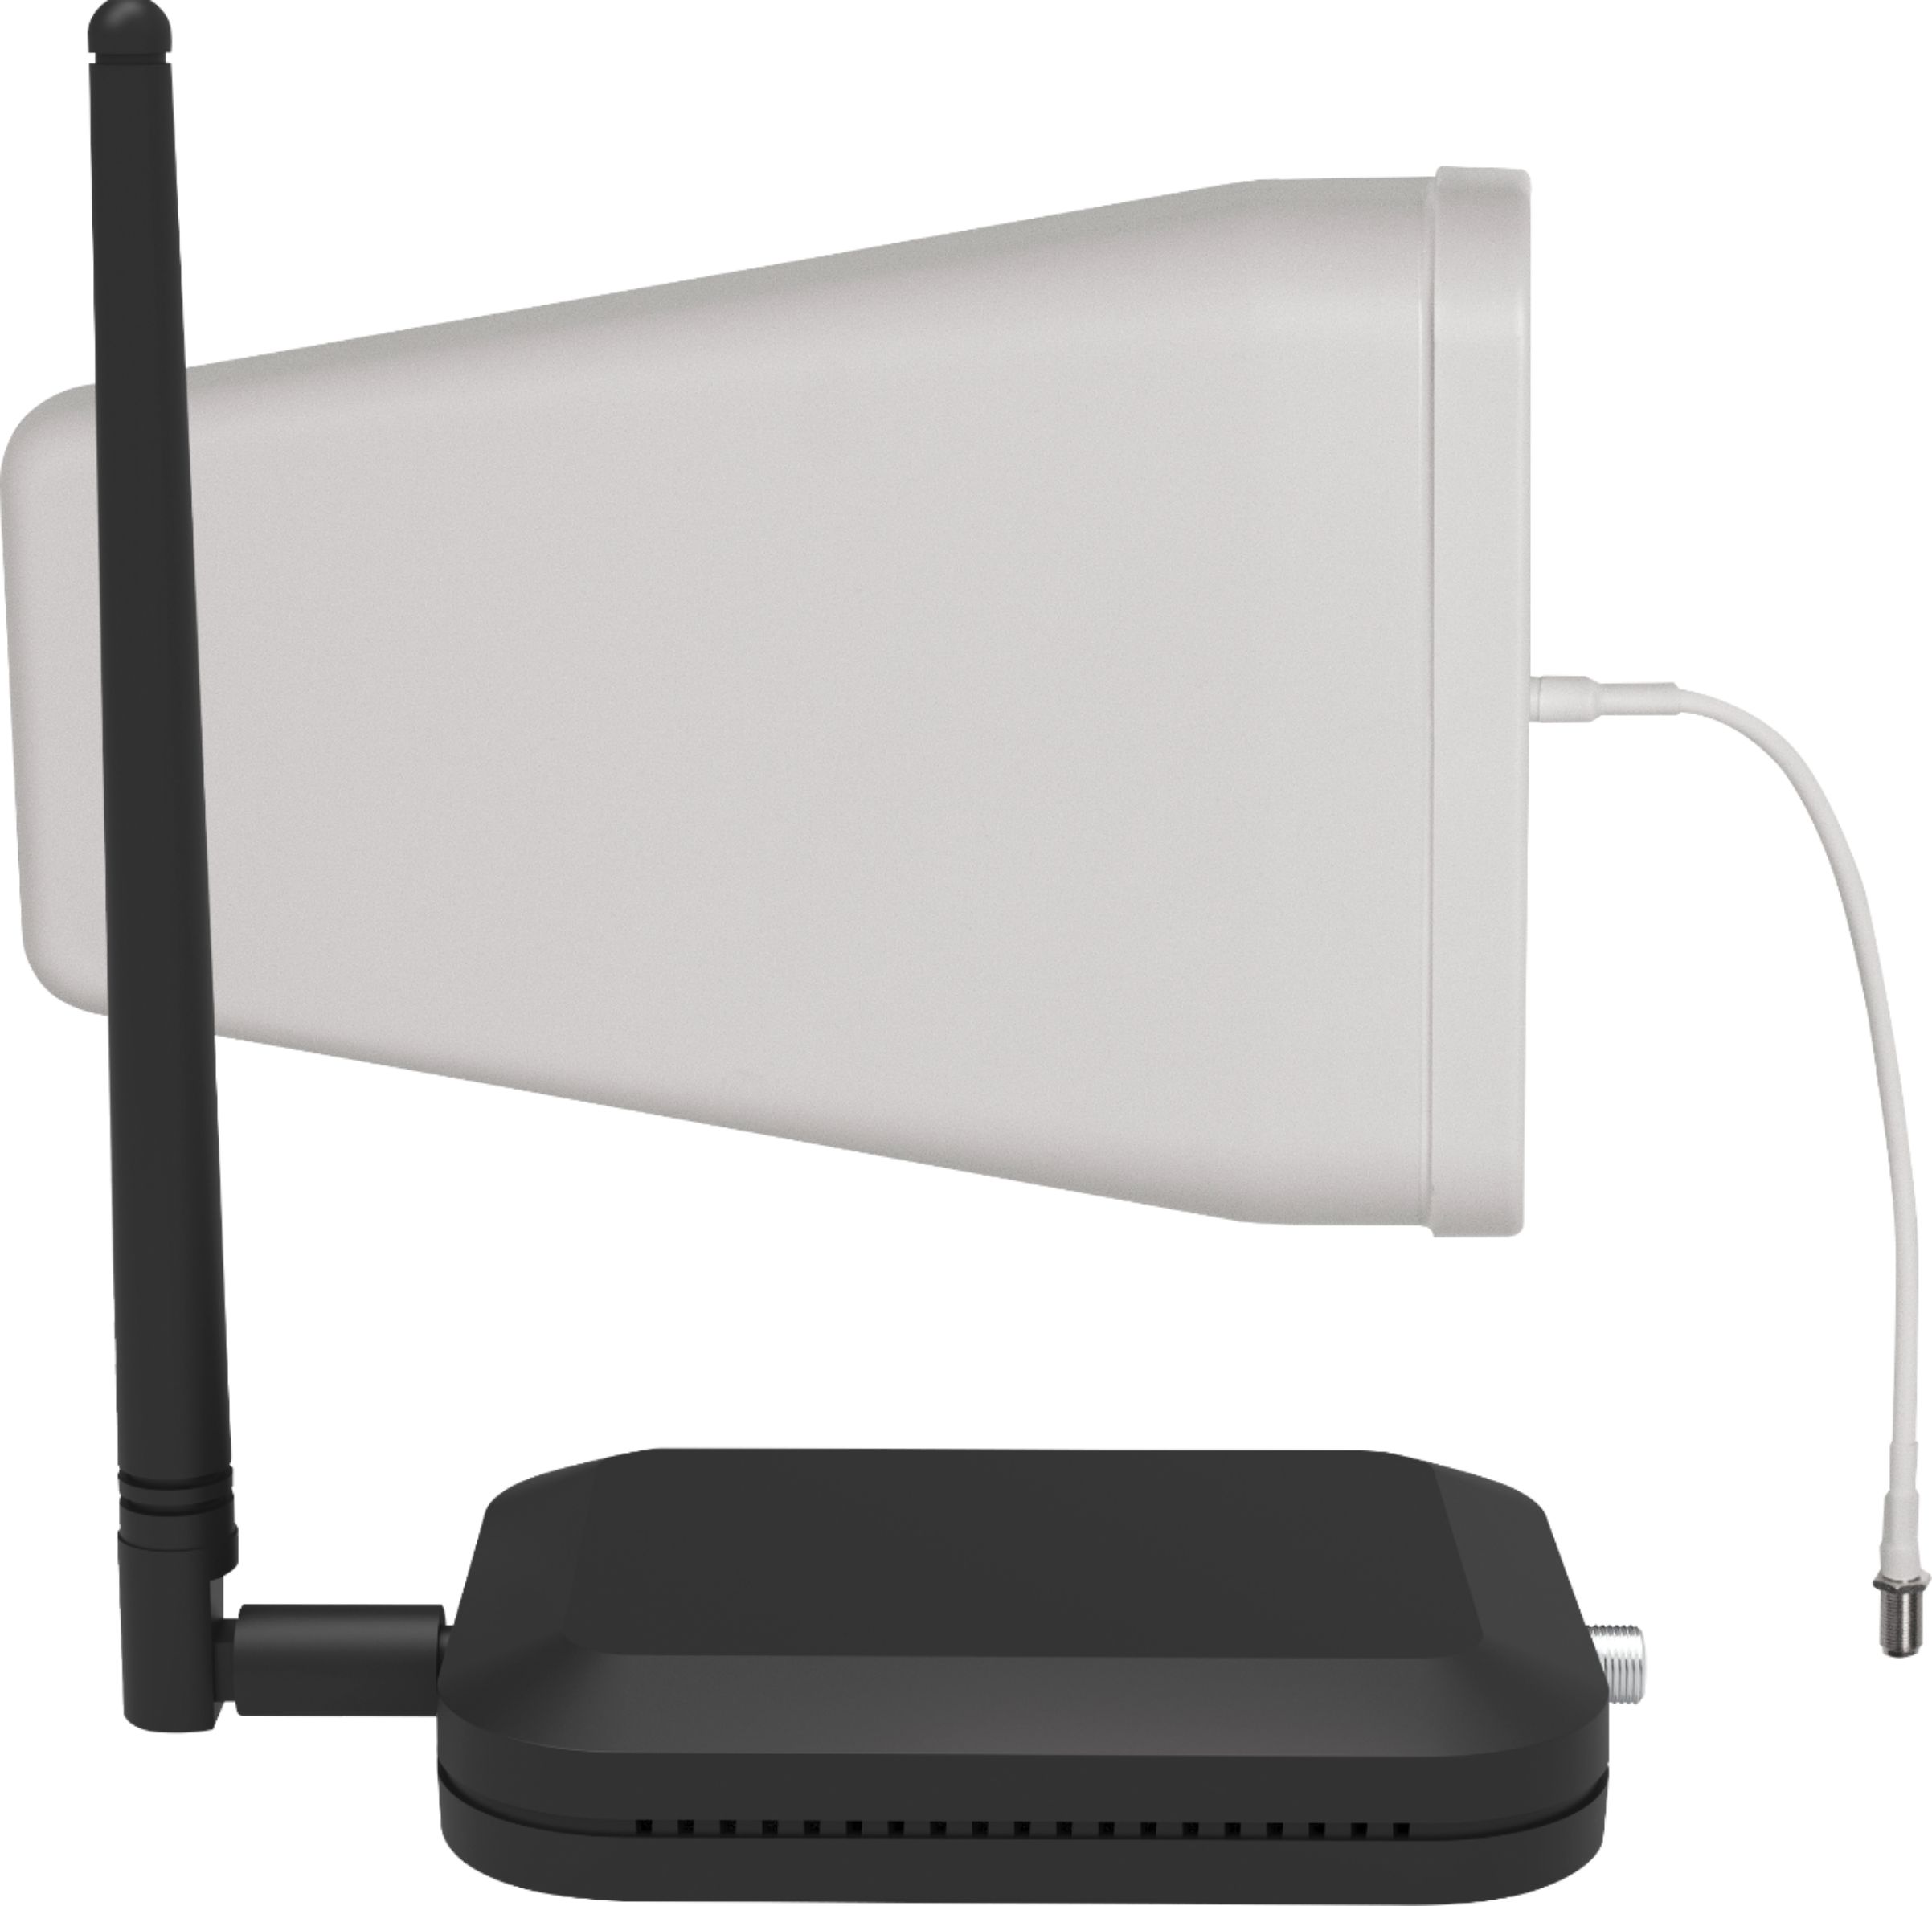 Left View: weBoost - Home Studio Cell Phone Signal Booster Kit for Single Room Coverage, Boosts 4G LTE & 5G for all U.S. Networks - Black